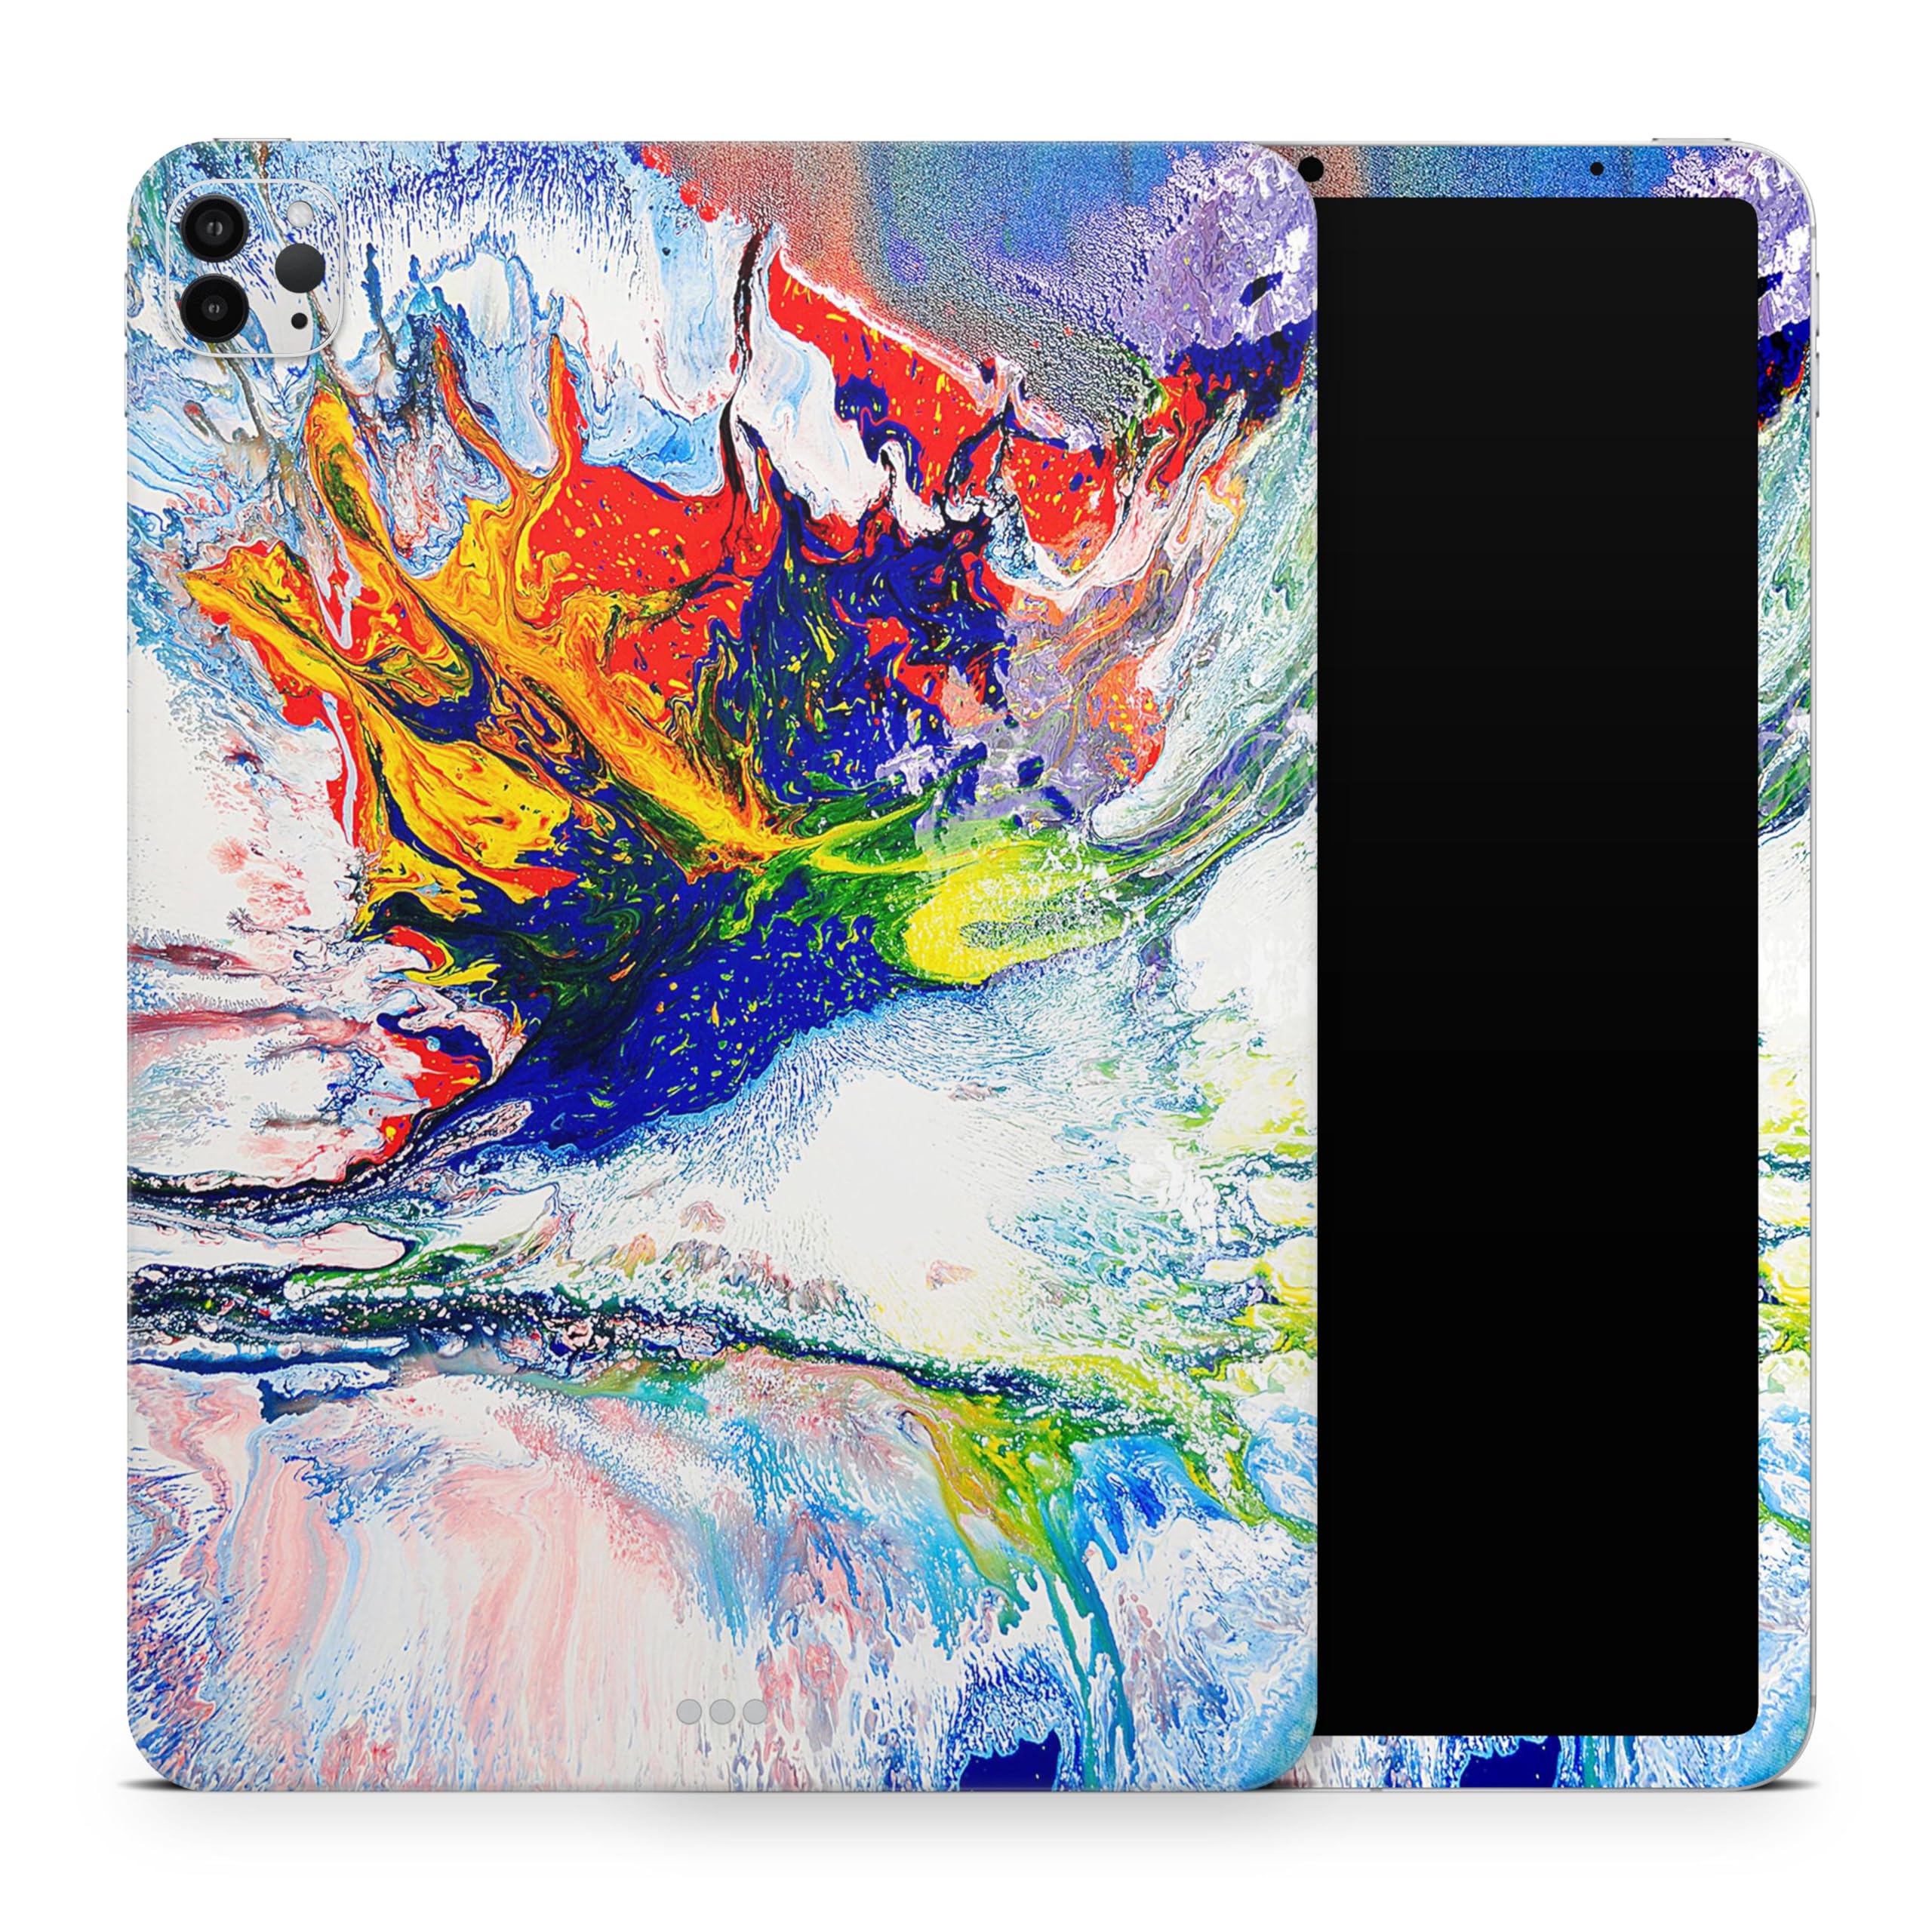 DesignSkinz - Compatible with iPad 5th 6th Gen 9.7